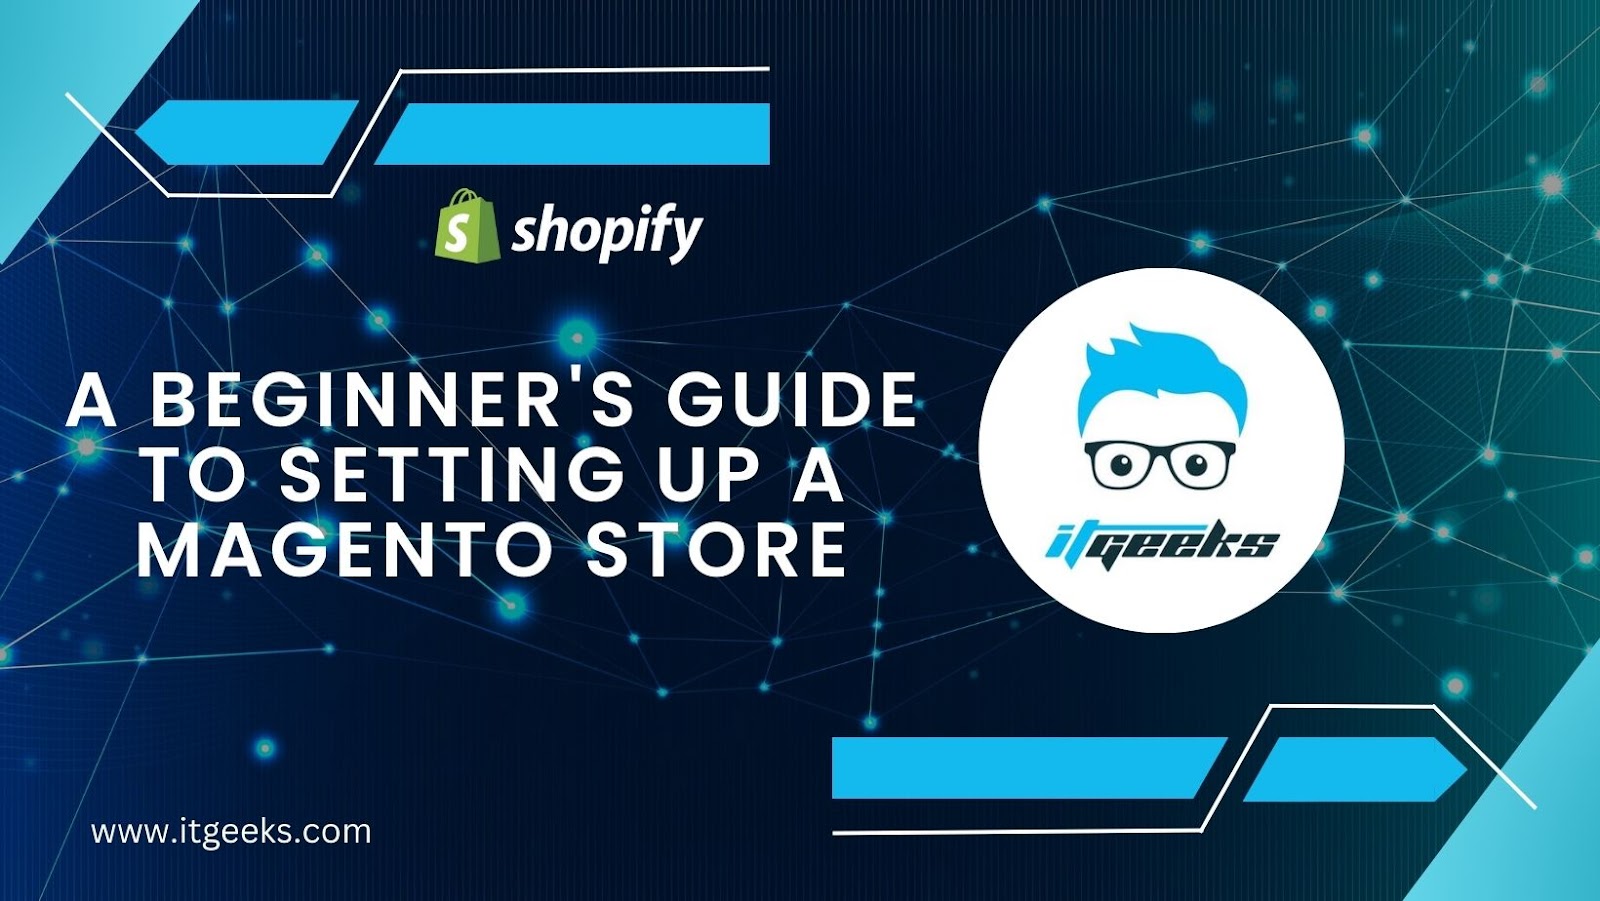 A Beginner's Guide to Setting Up a Magento Store